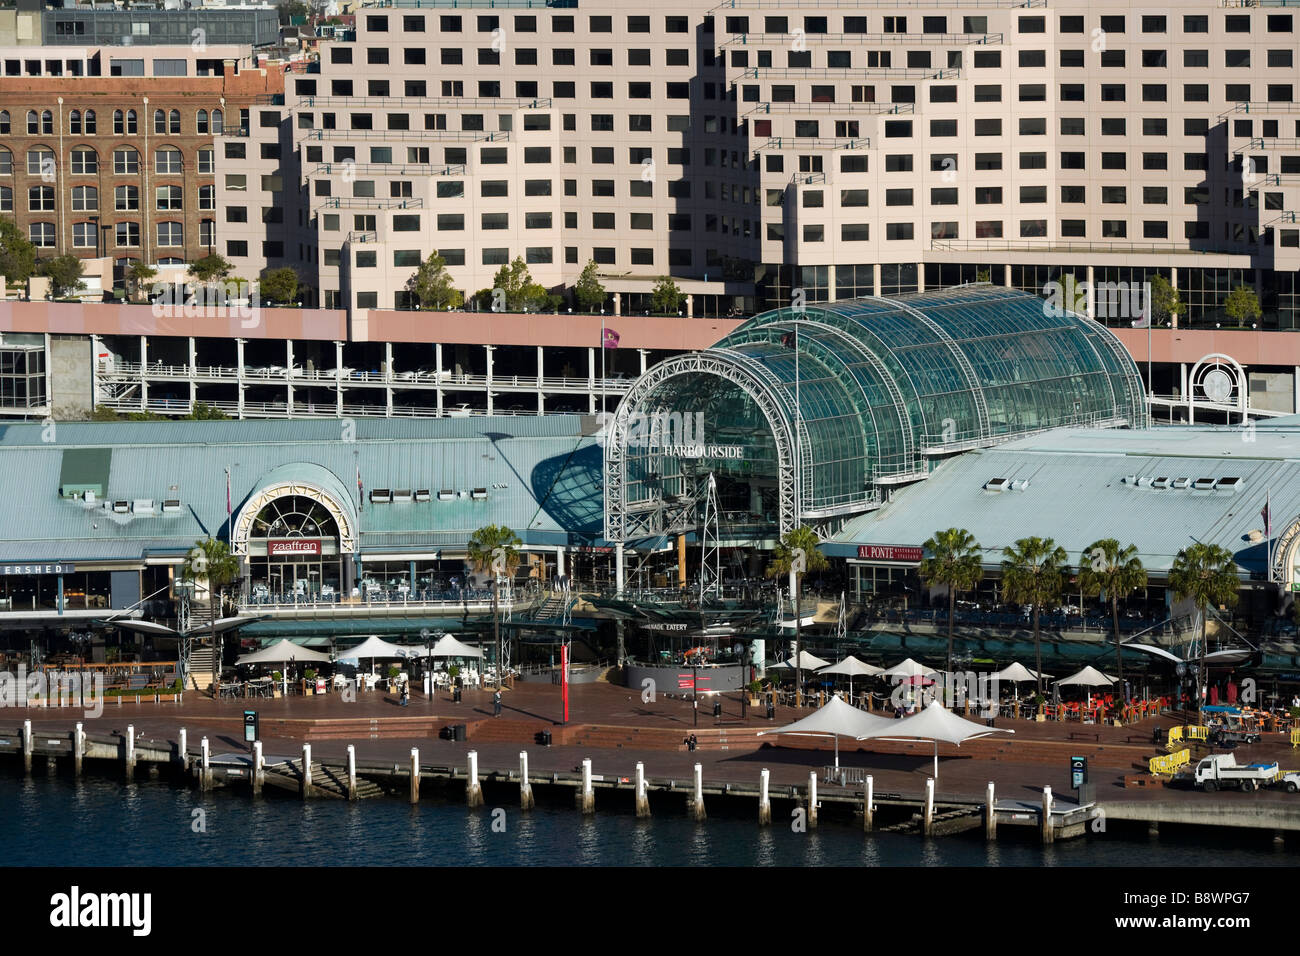 Sydney Australia. Novotel Hotel and Harbourside Shopping Mall and Restaurants on Cockle Bay, Darling Harbour. Stock Photo